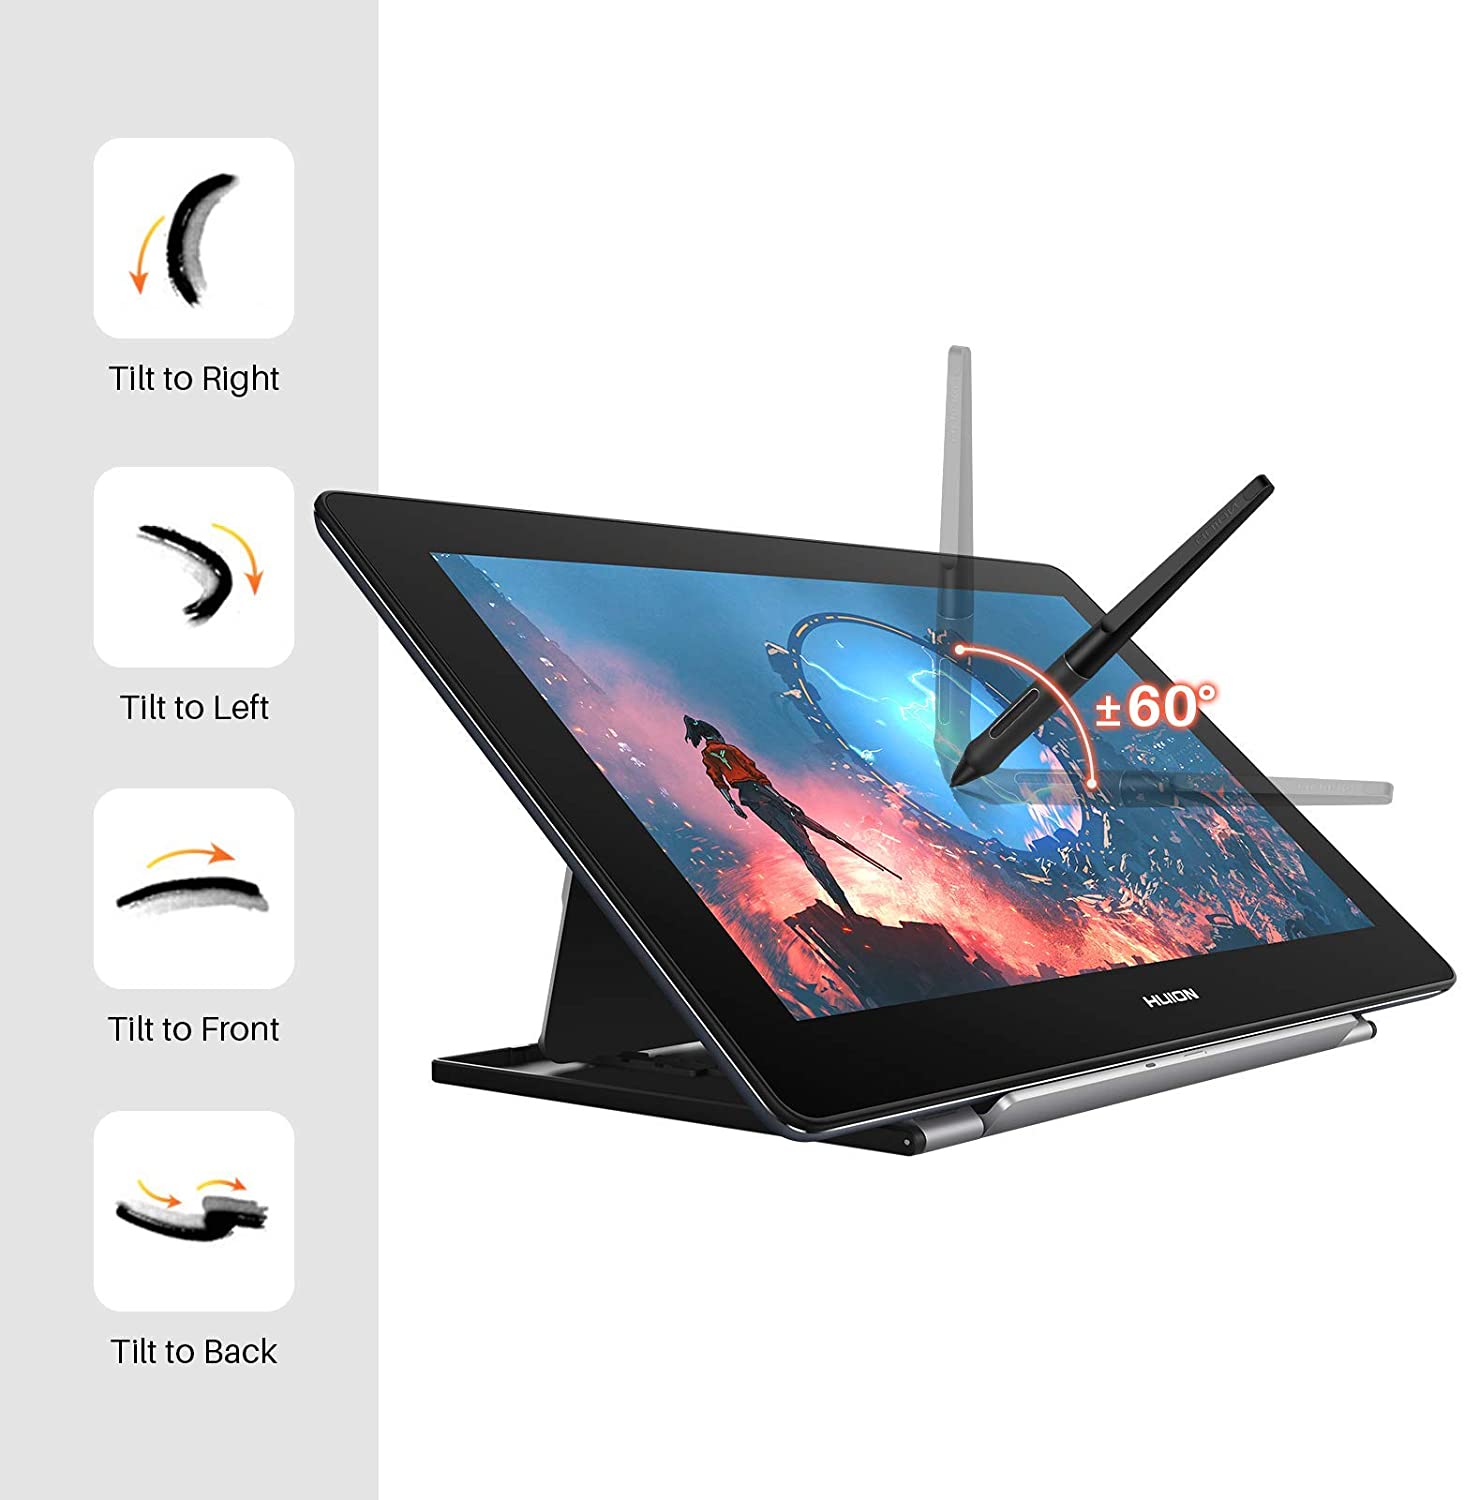 HUION Kamvas Pro 16(4K) UHD Drawing Tablet with Screen pen use